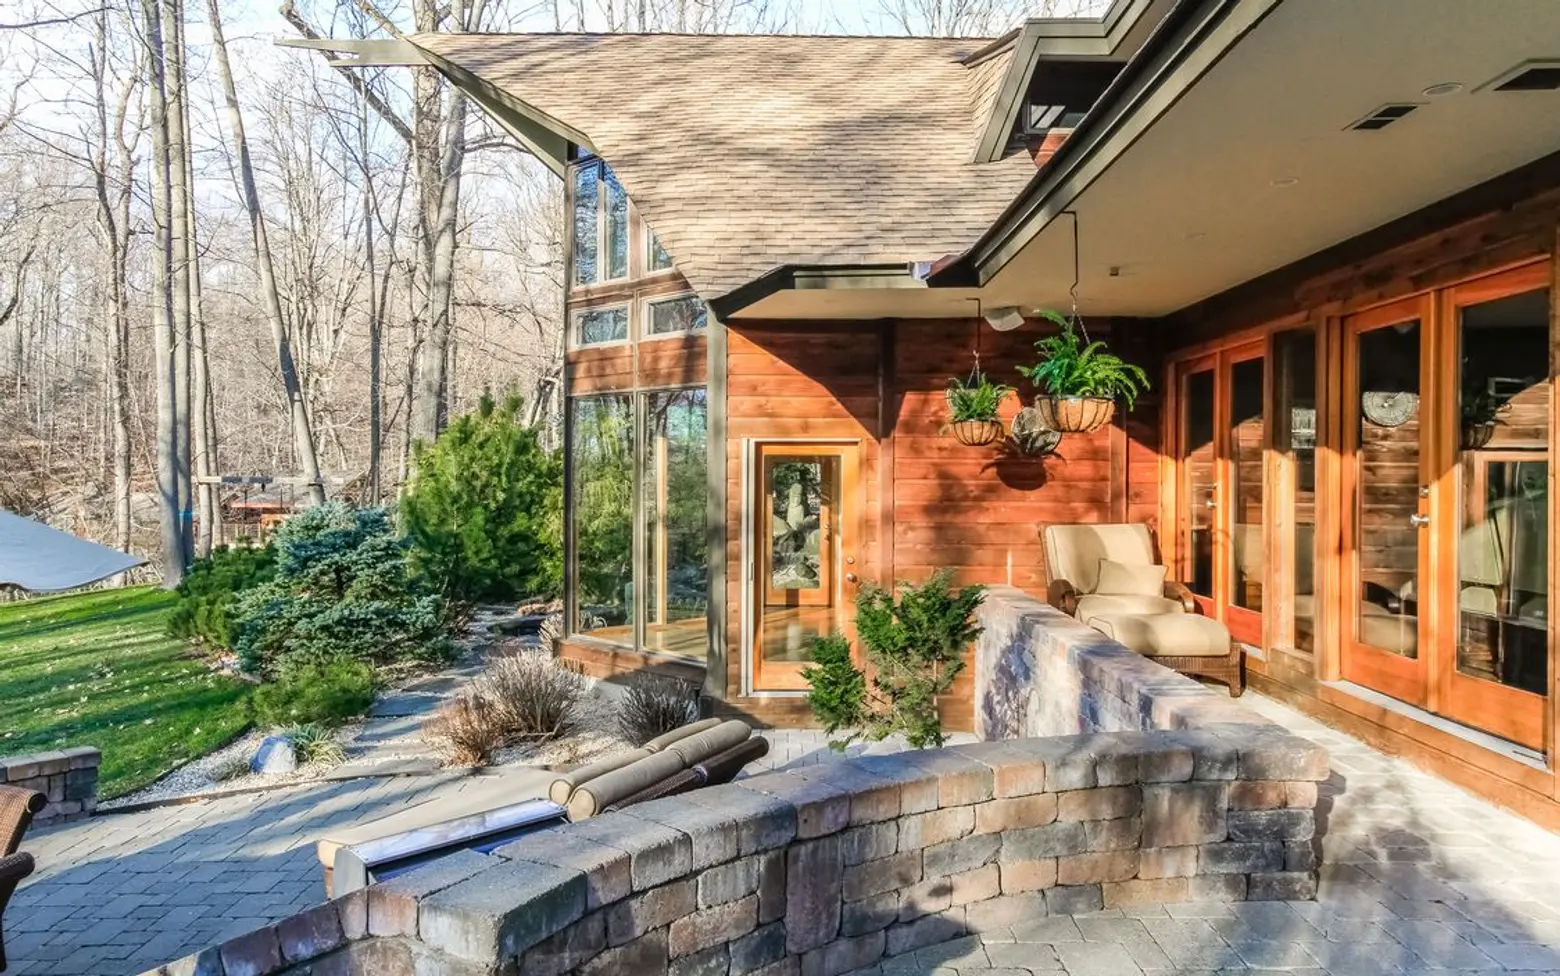 543 Scarborough Road, cool listings, briarcliff, westchester, ossining, midcentury modern, modern house, frank lloyd wright, outdoor spaces, waterfall